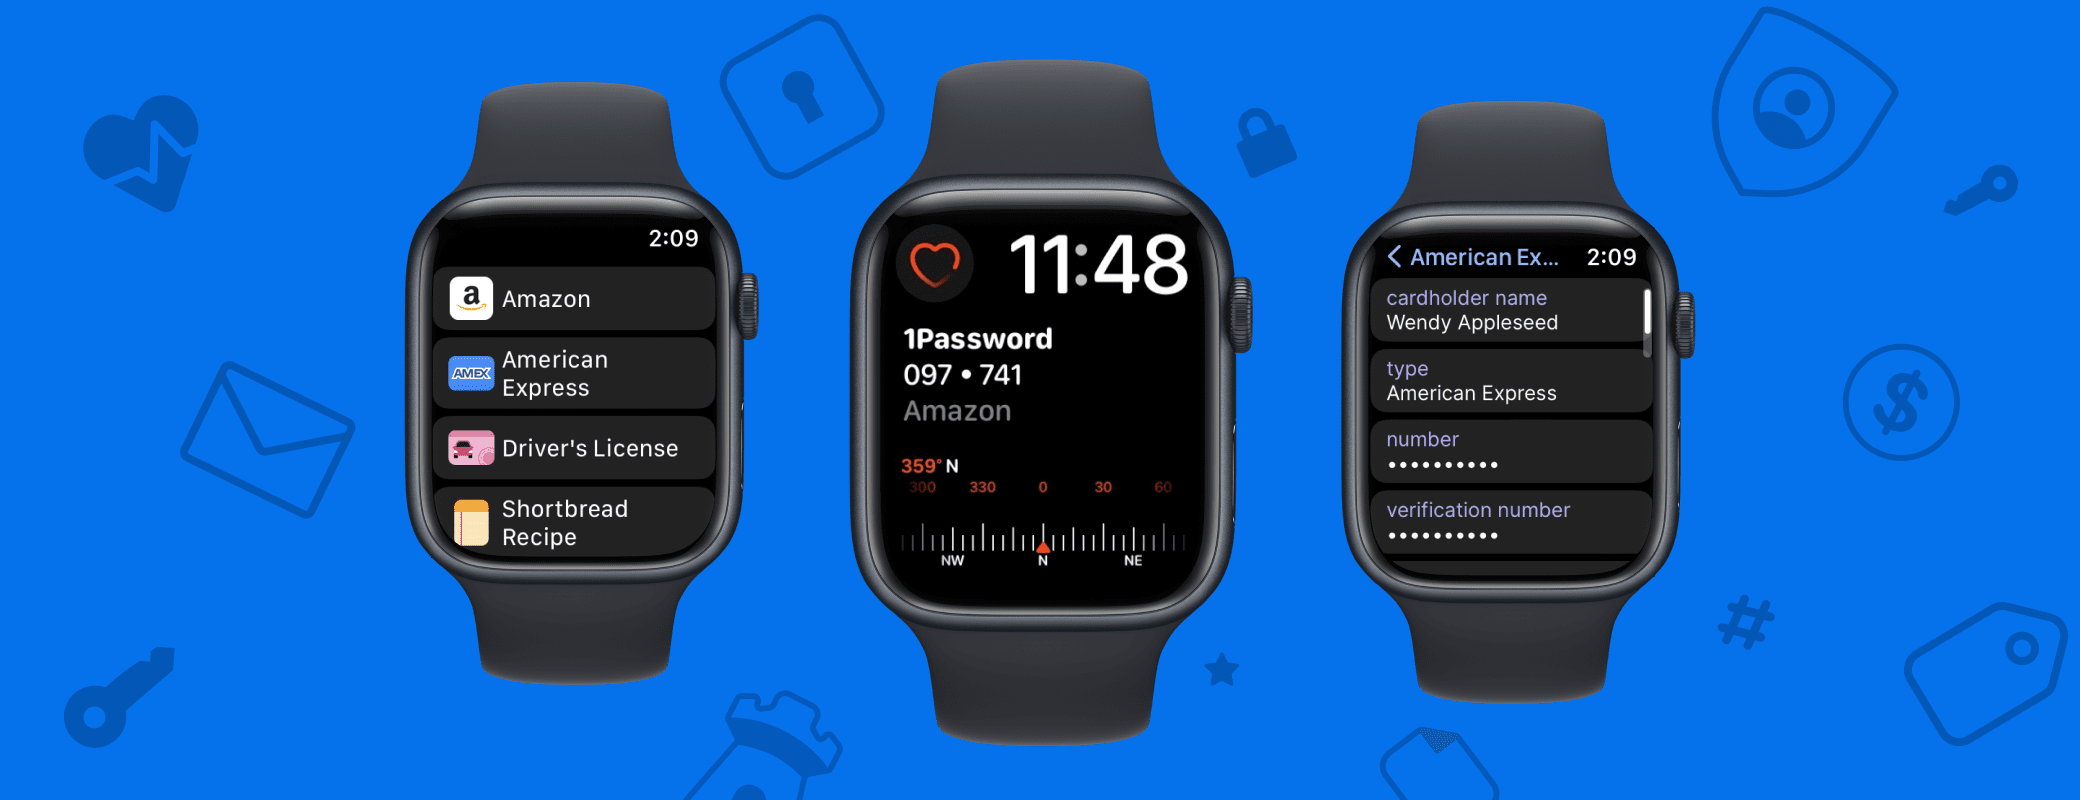 Apple Watch users can now access 1Password 8